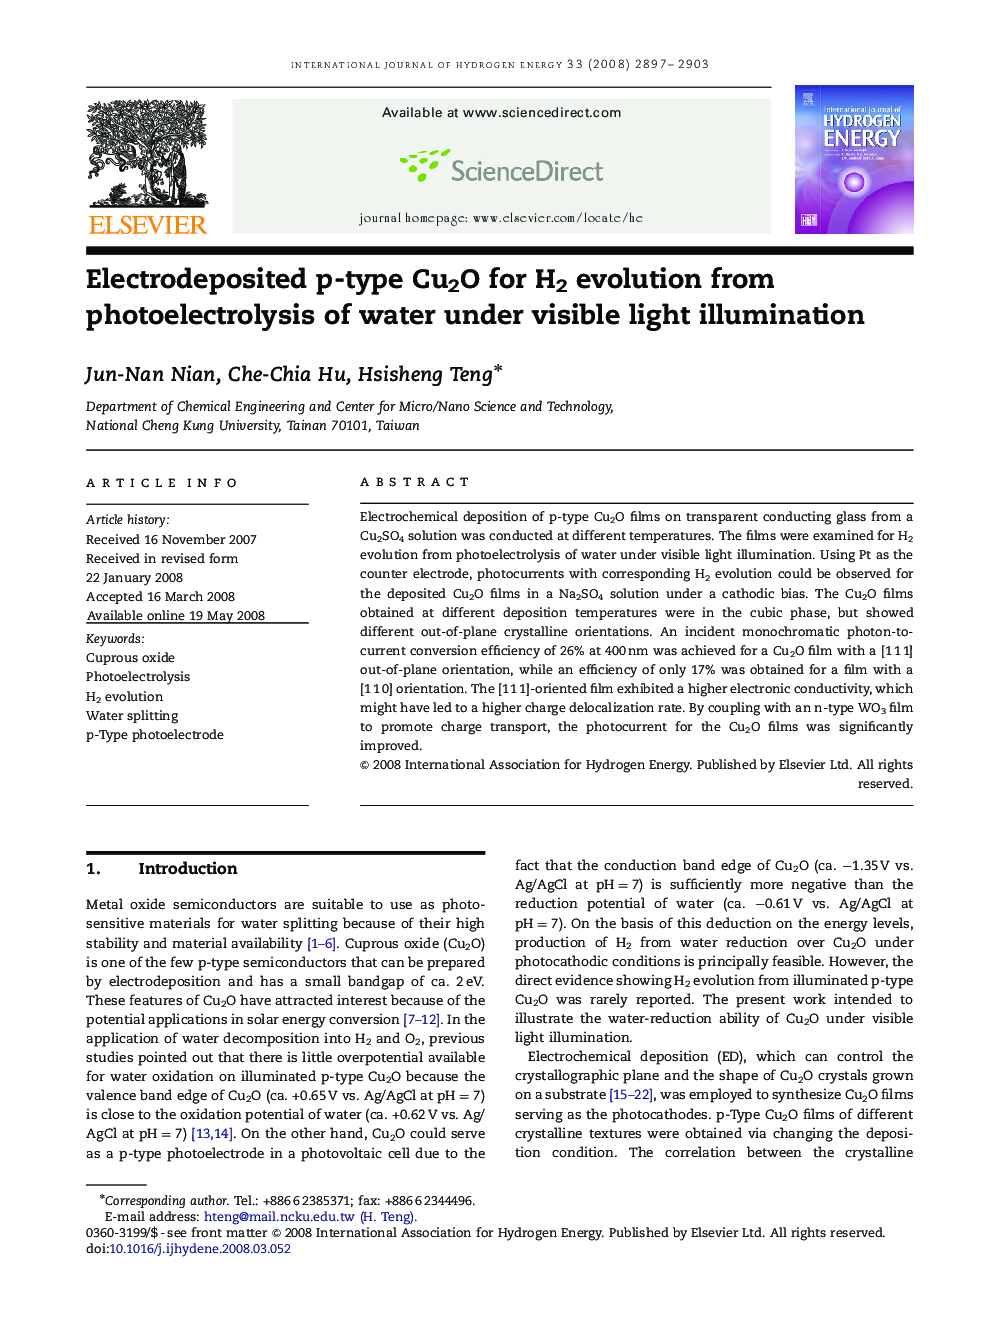 Electrodeposited p-type Cu2O for H2 evolution from photoelectrolysis of water under visible light illumination